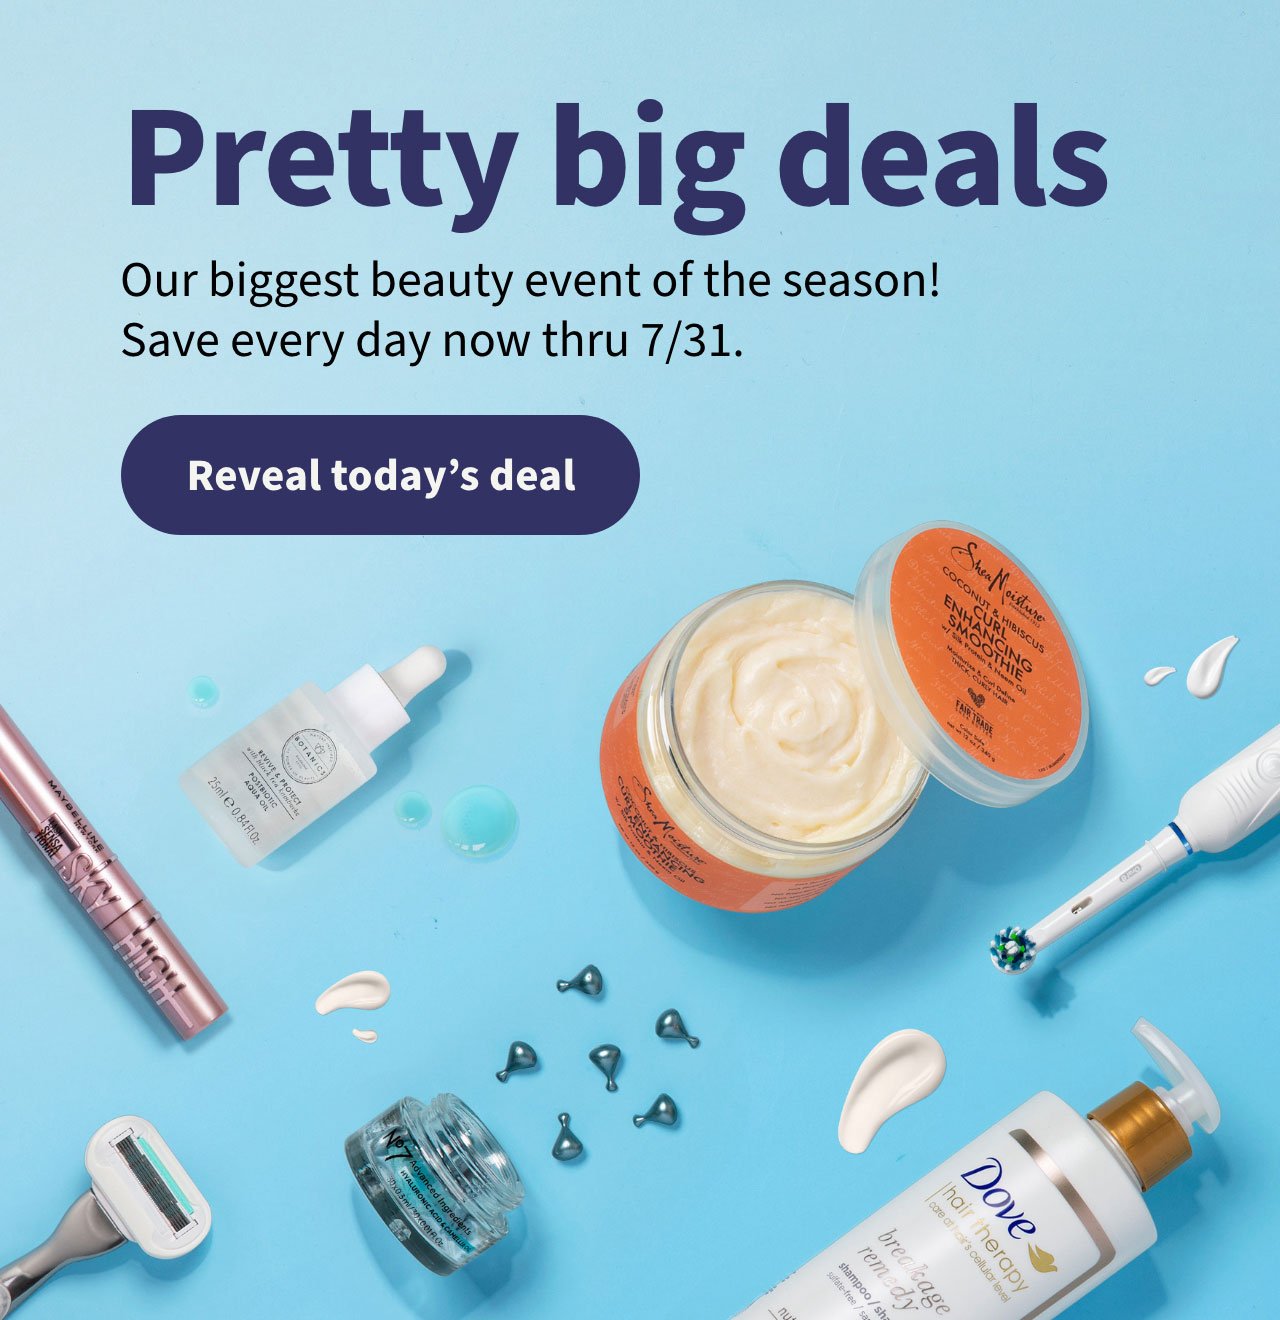 Pretty big deals. Our biggest beauty event of the season! Save every day now thru 7/31. Reveal today's deal.